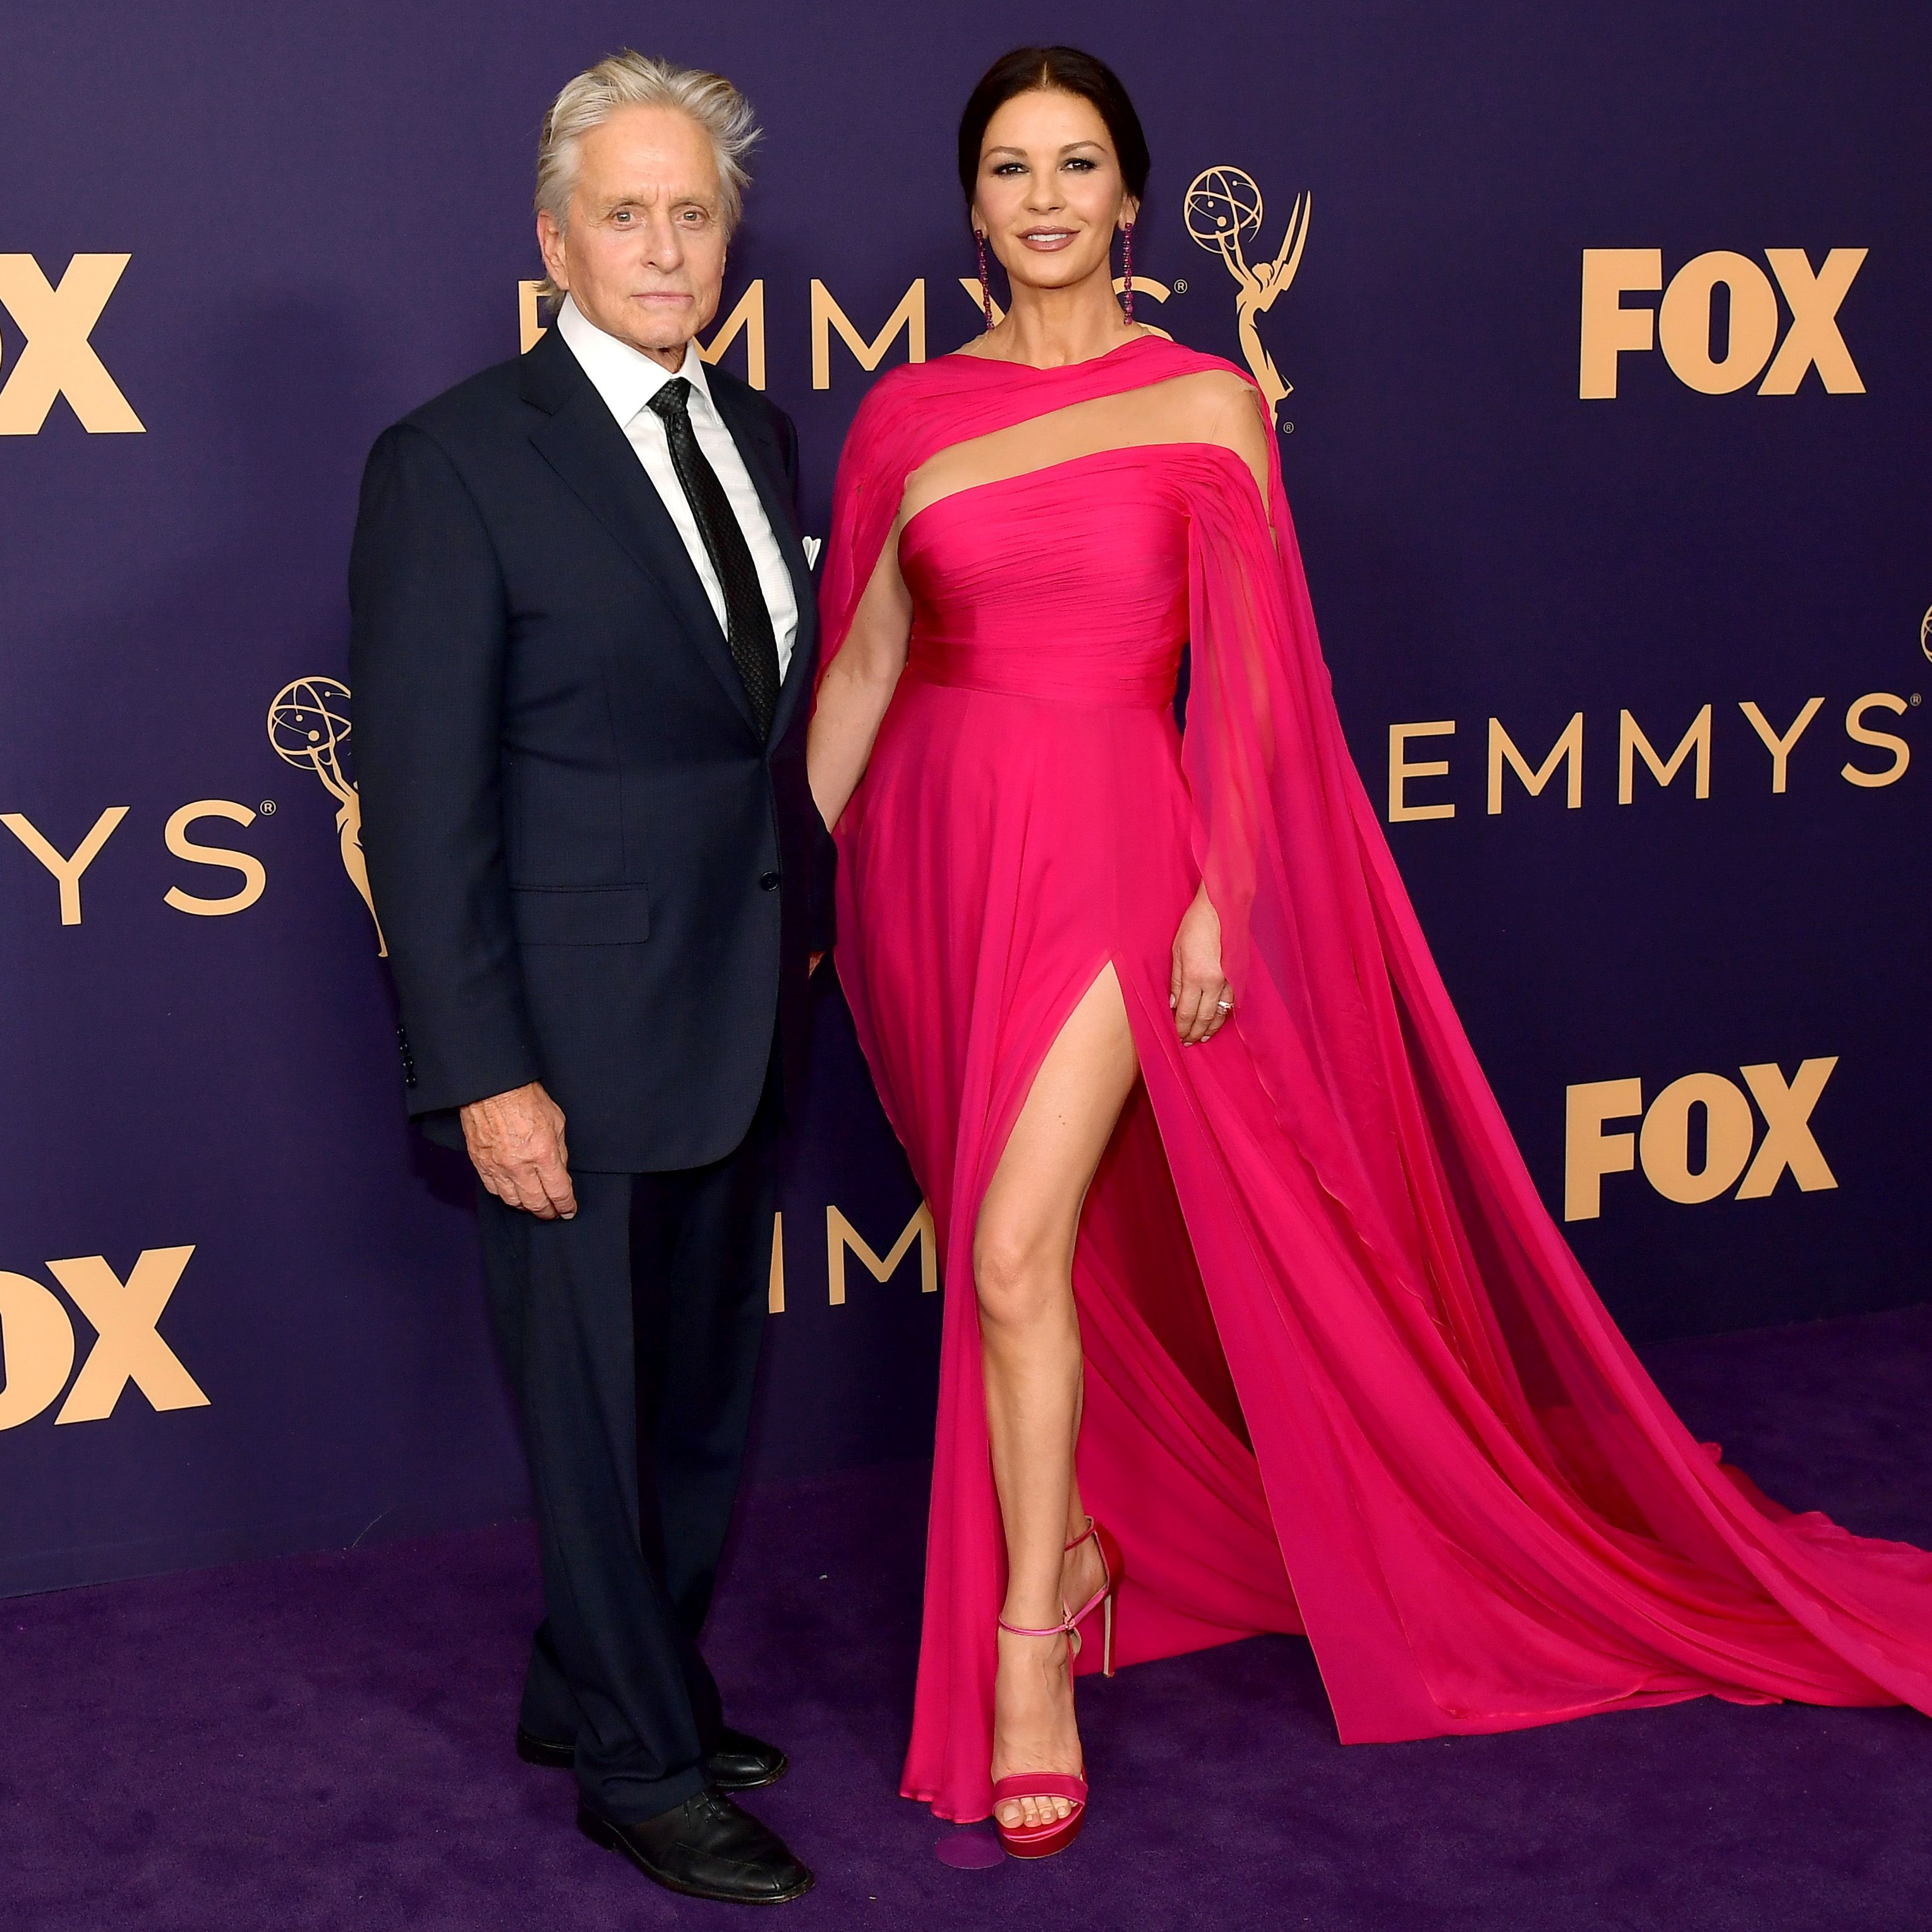 Michael Douglas and Catherine Zeta-Jones at the 71st Emmy Awards on September 22, 2019 | Photo: Getty Images